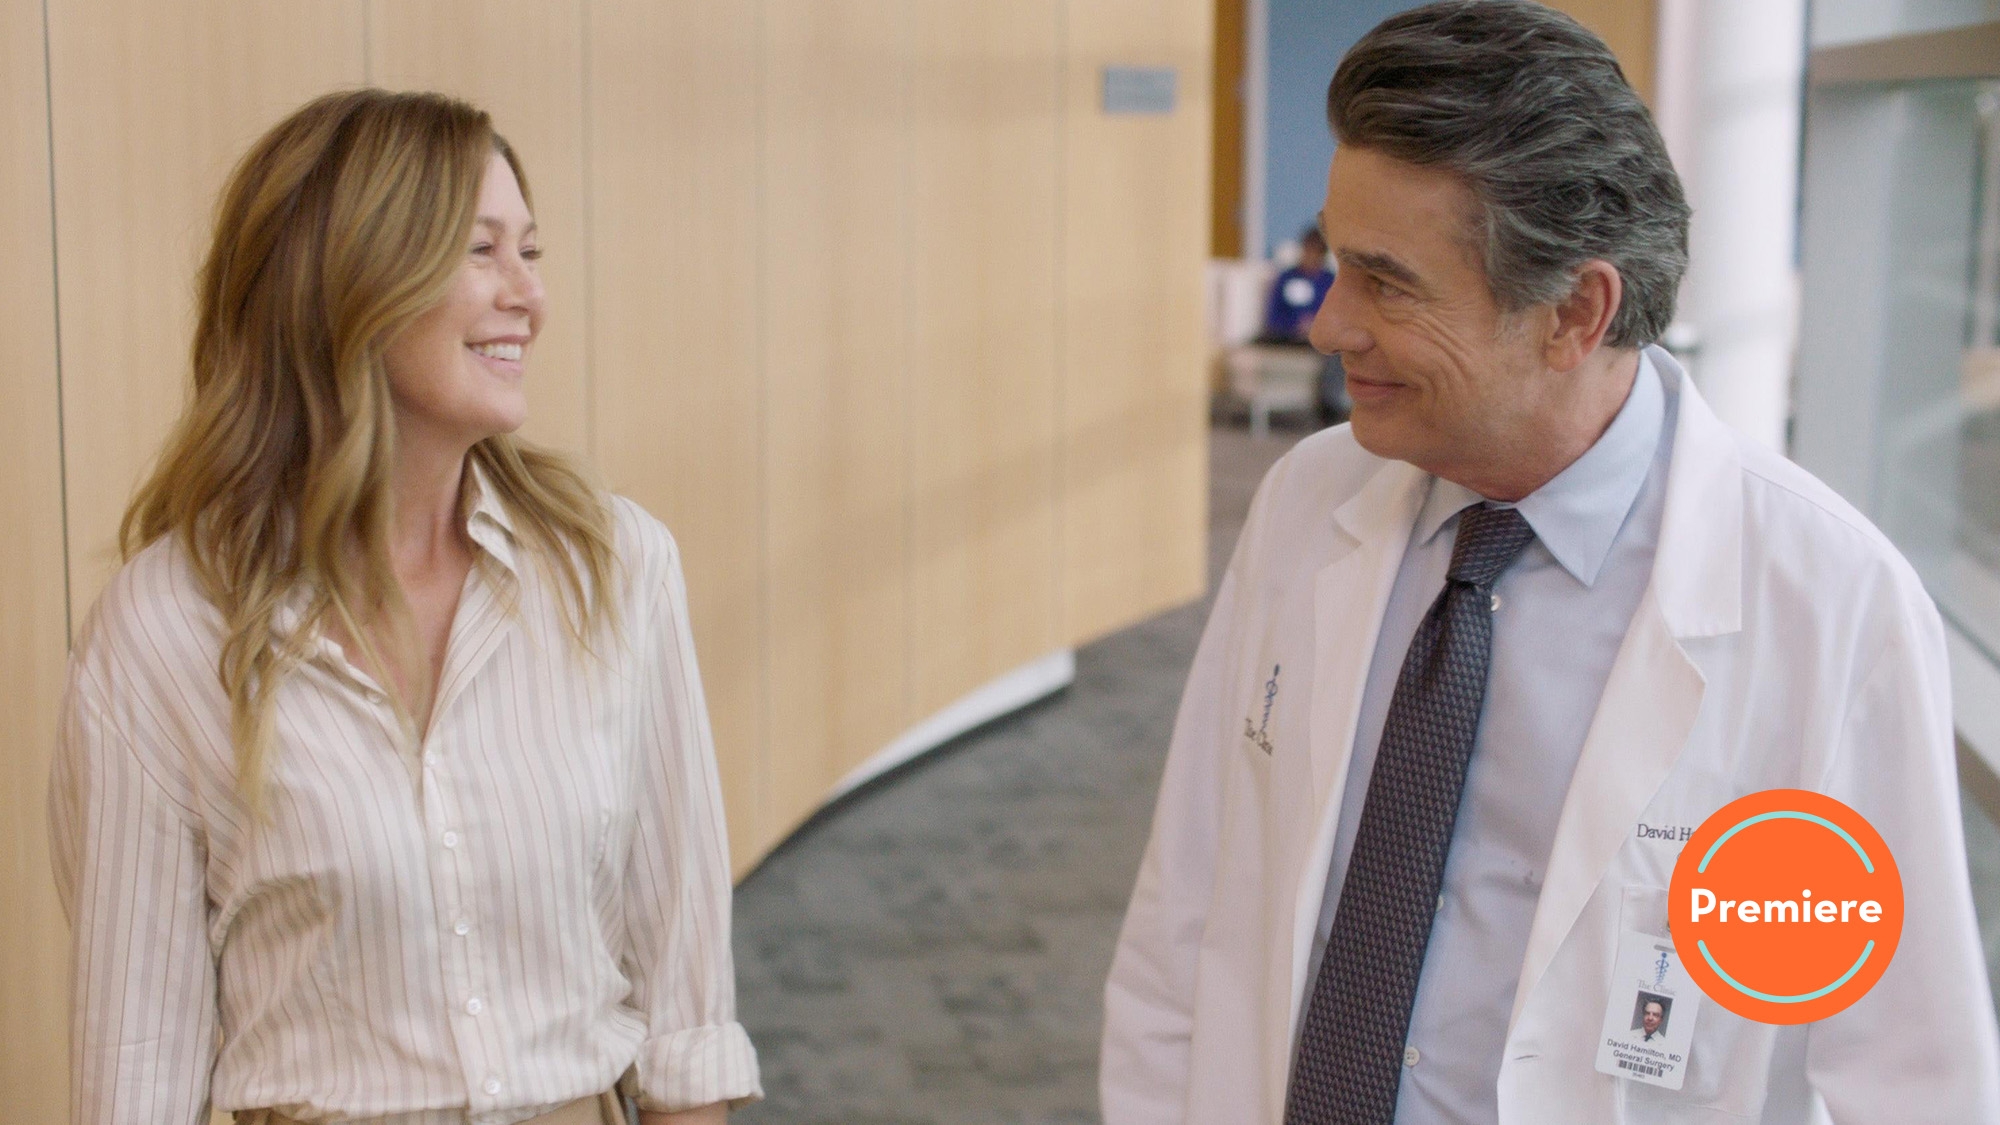 Even Peter Gallagher fails to spice up Grey’s Anatomy’s lackluster 18th season premiere